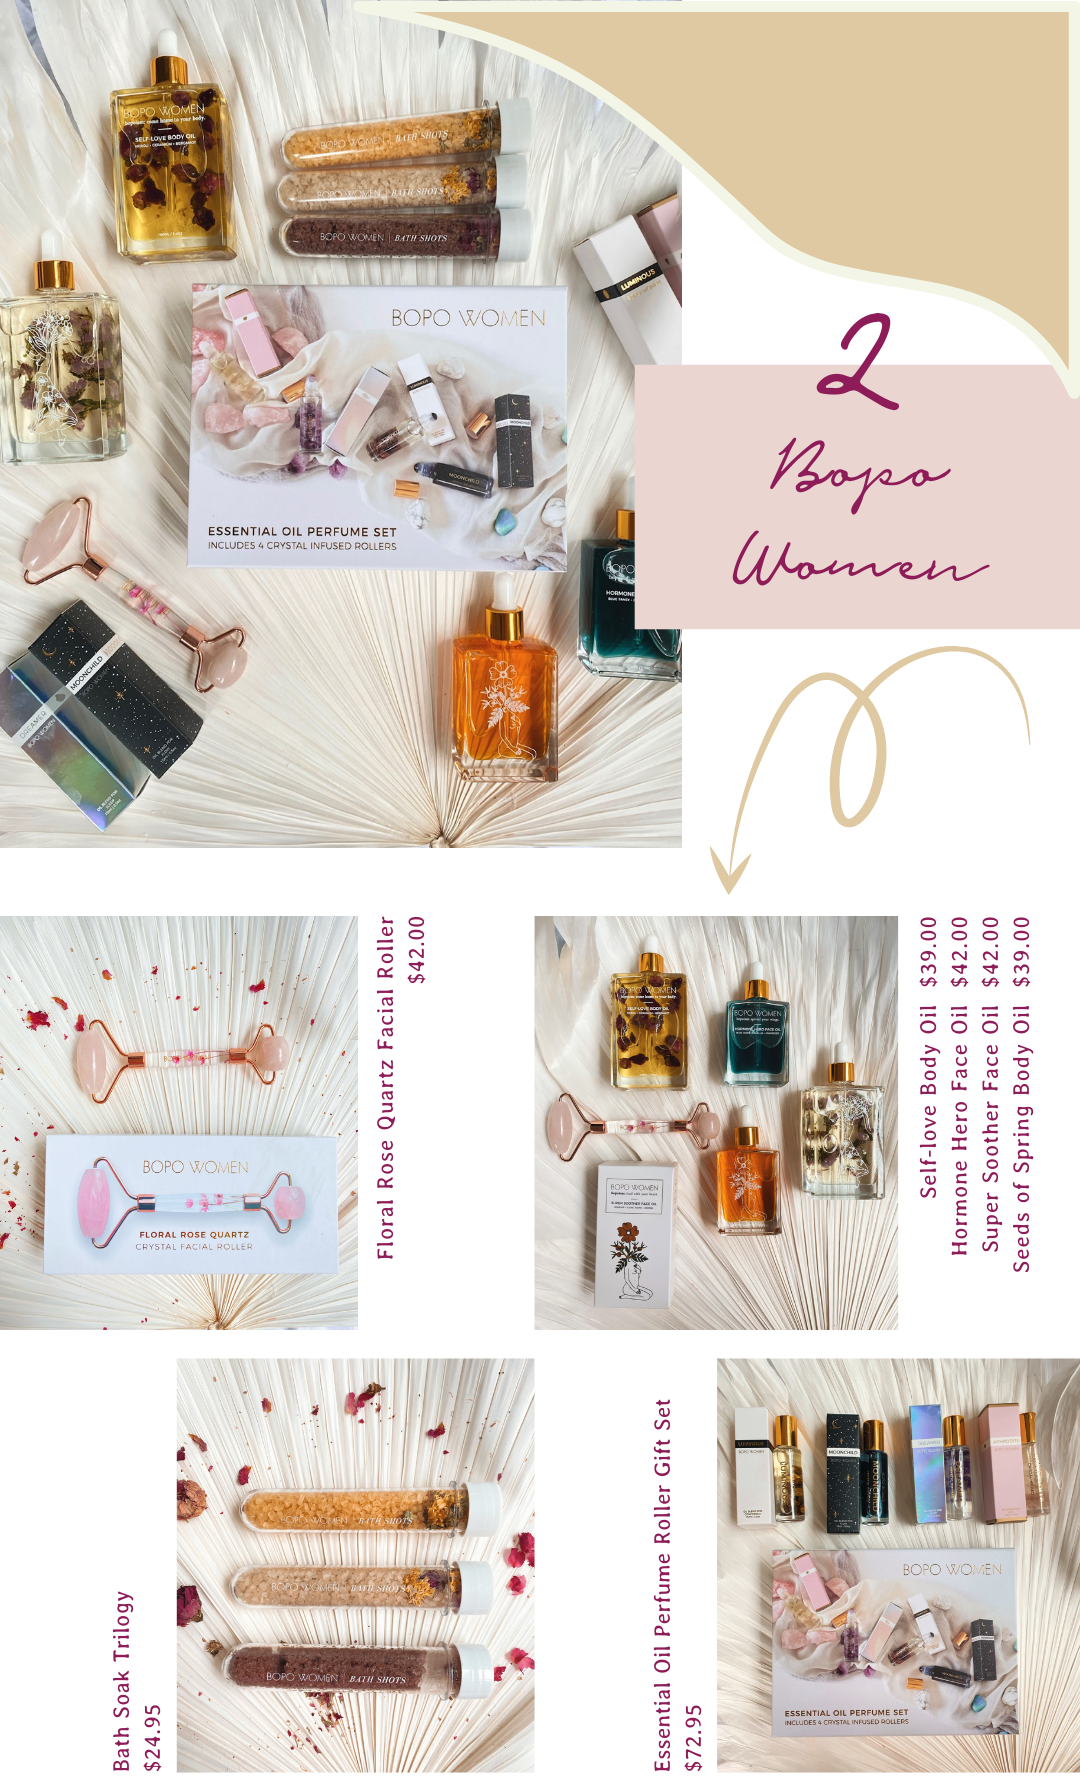 Bopo Women Products - Valentine's Day Gifts